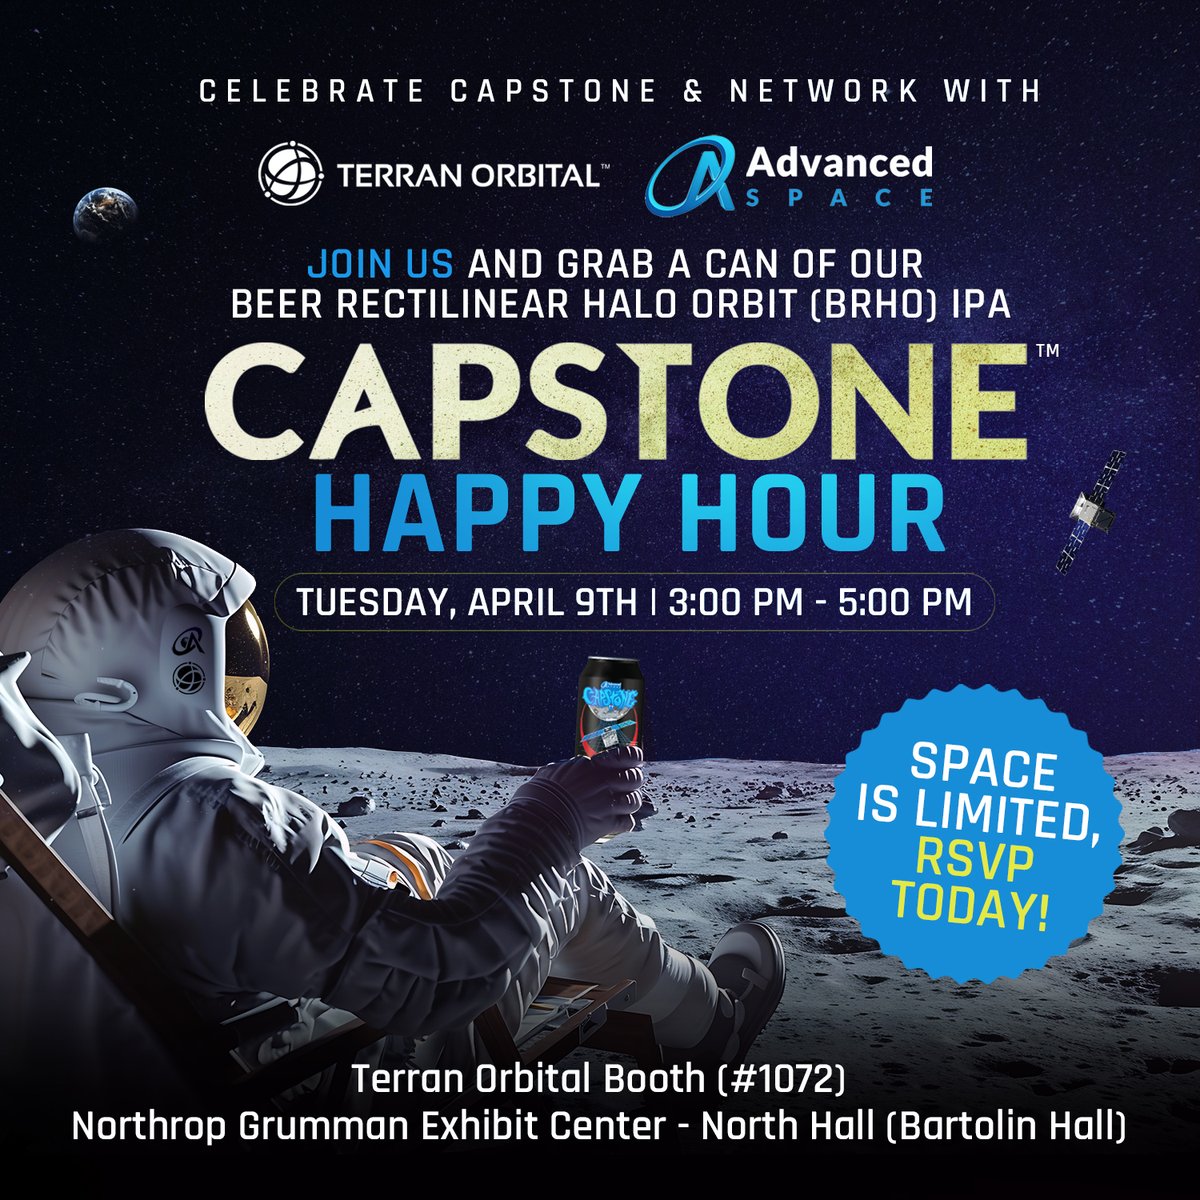 Join us Terran Orbital and Advanced Space at booth #1072 today from 3pm-5pm for our #CAPSTONE happy hour at #SpaceSymposium! We invite you to network with our team and savor our Beer Rectilinear Halo Orbit (BRHO) IPA. #TerranOrbital #AdvancedSpace #CAPSTONE #SpaceSymposium